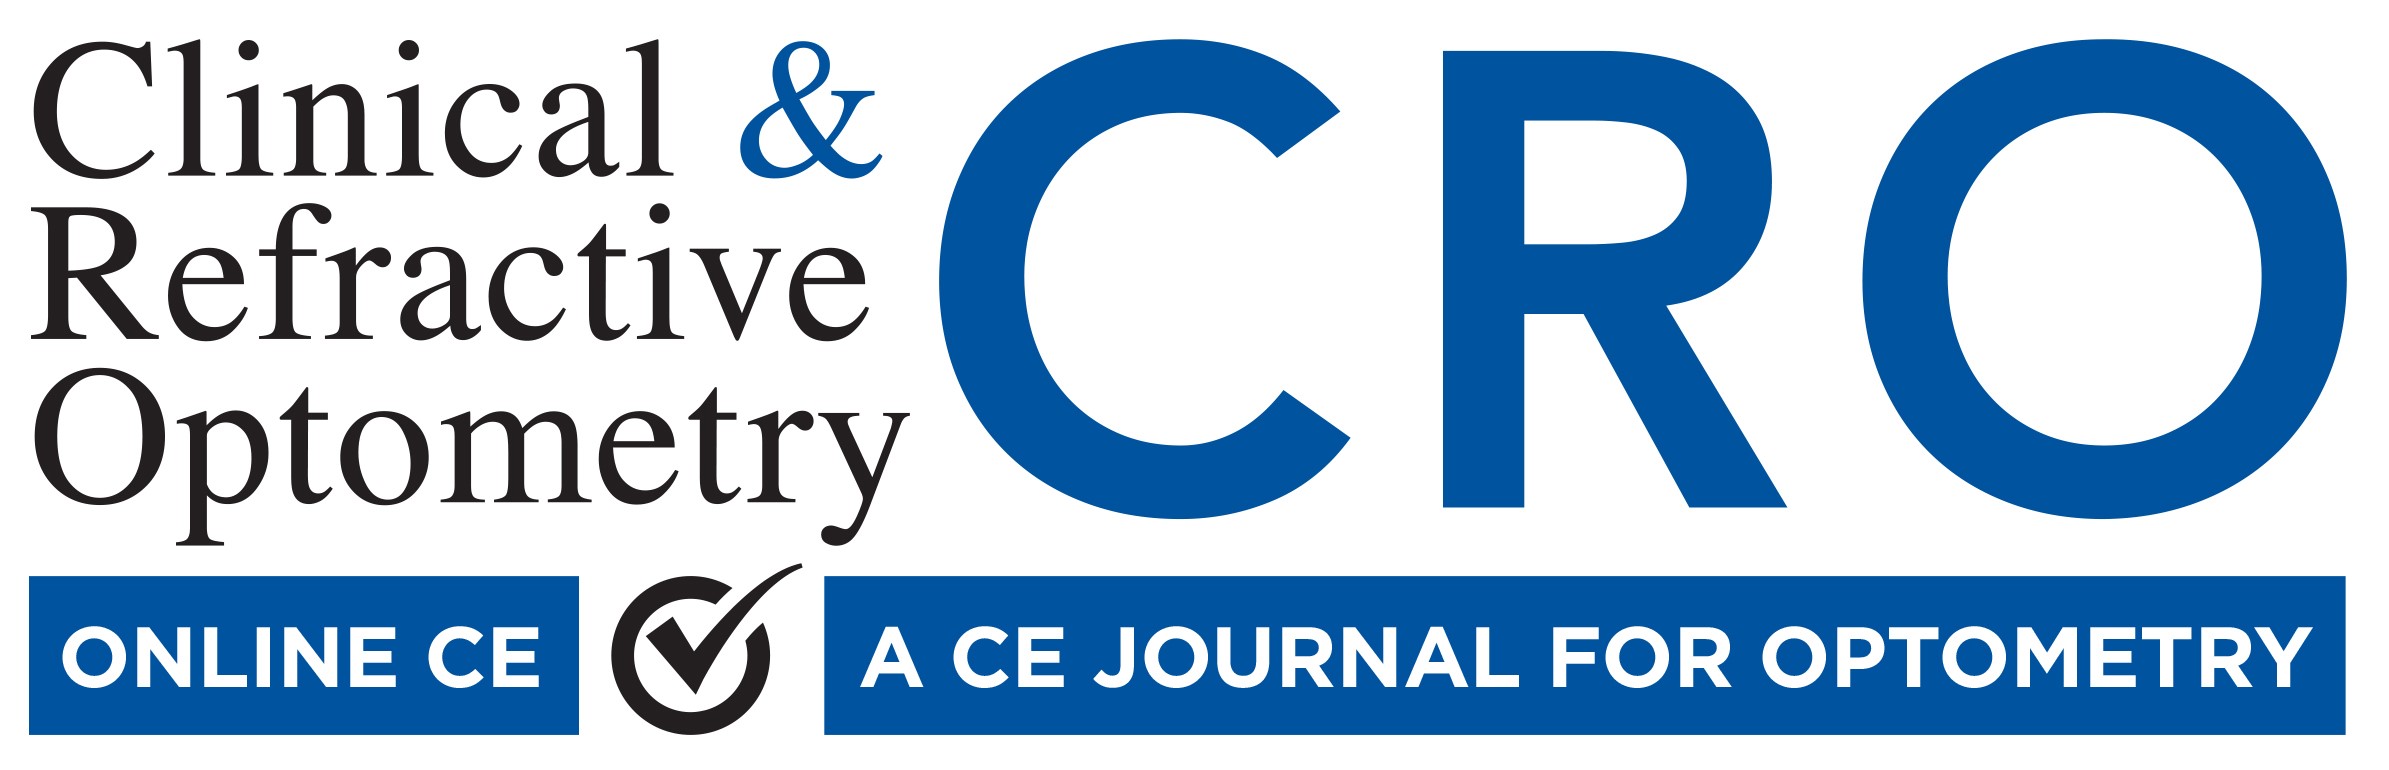 CRO A CE Journal For Optometry Logo